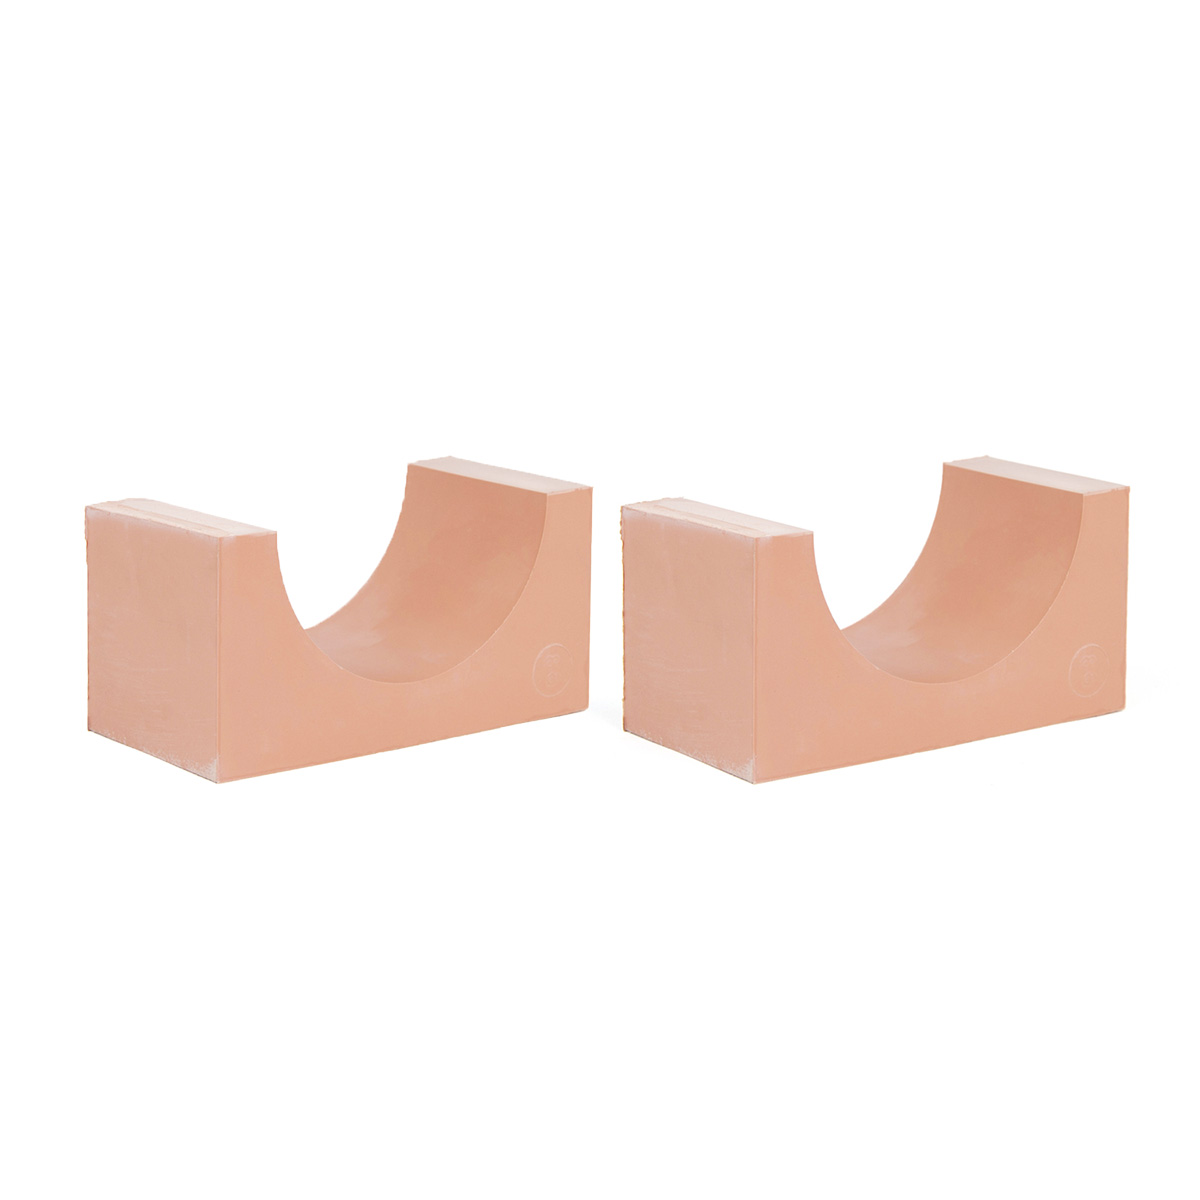 120-100*2 Set of 2 half insert block lycron, 120-100 for cable/pipe diam. 99.5-101.5mm